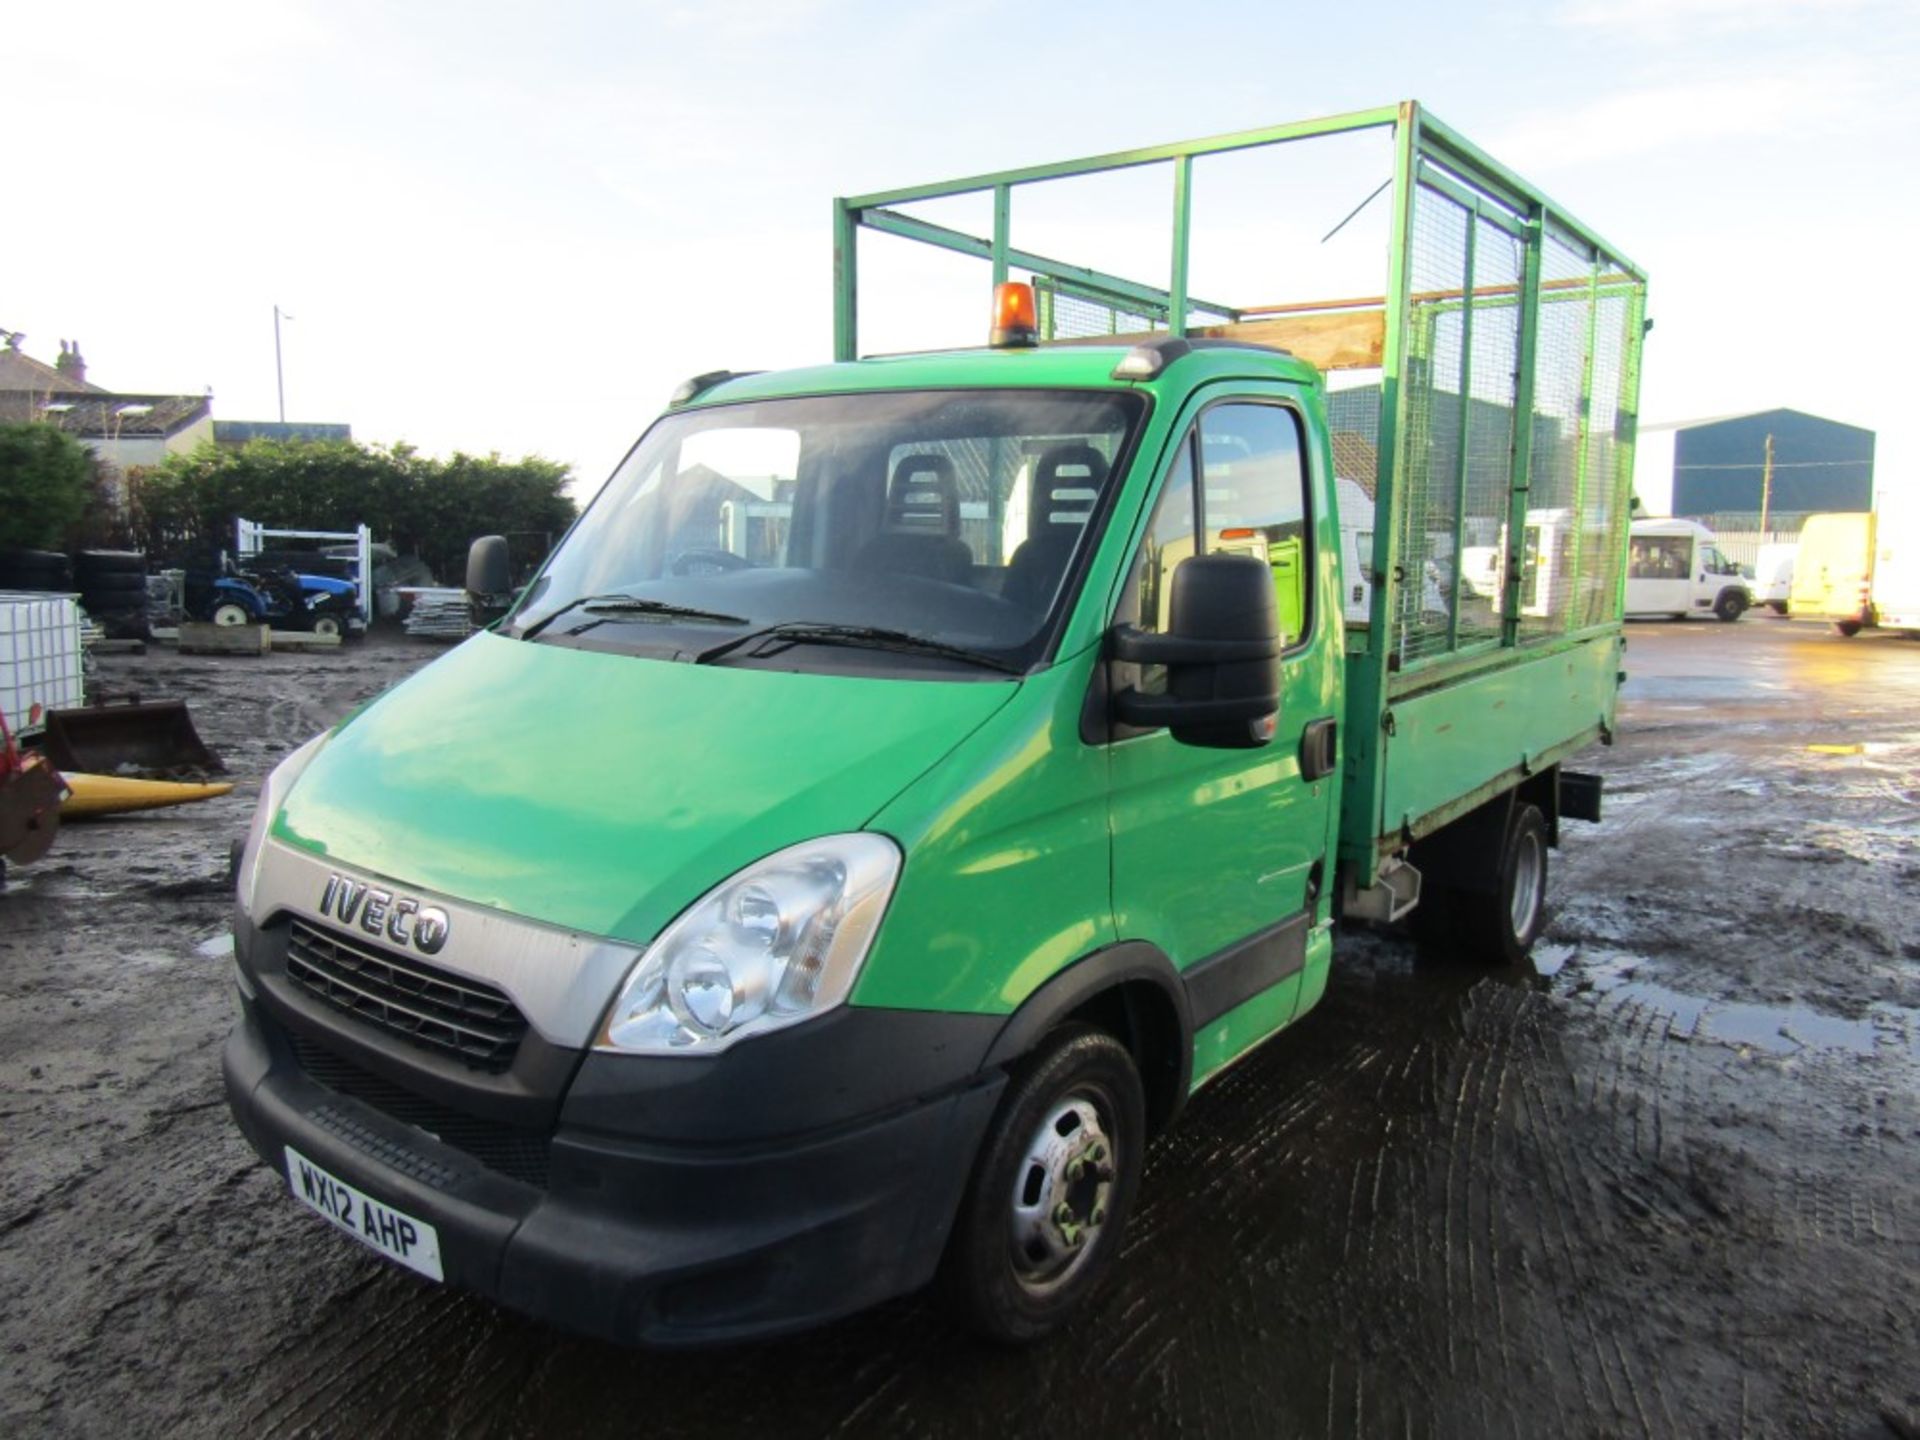 12 reg IVECO DAILY 35C11 MWB TIPPER, 1ST REG 03/12, TEST 06/22, 100762M WARRANTED, V5 HERE, 3 FORMER - Image 2 of 6